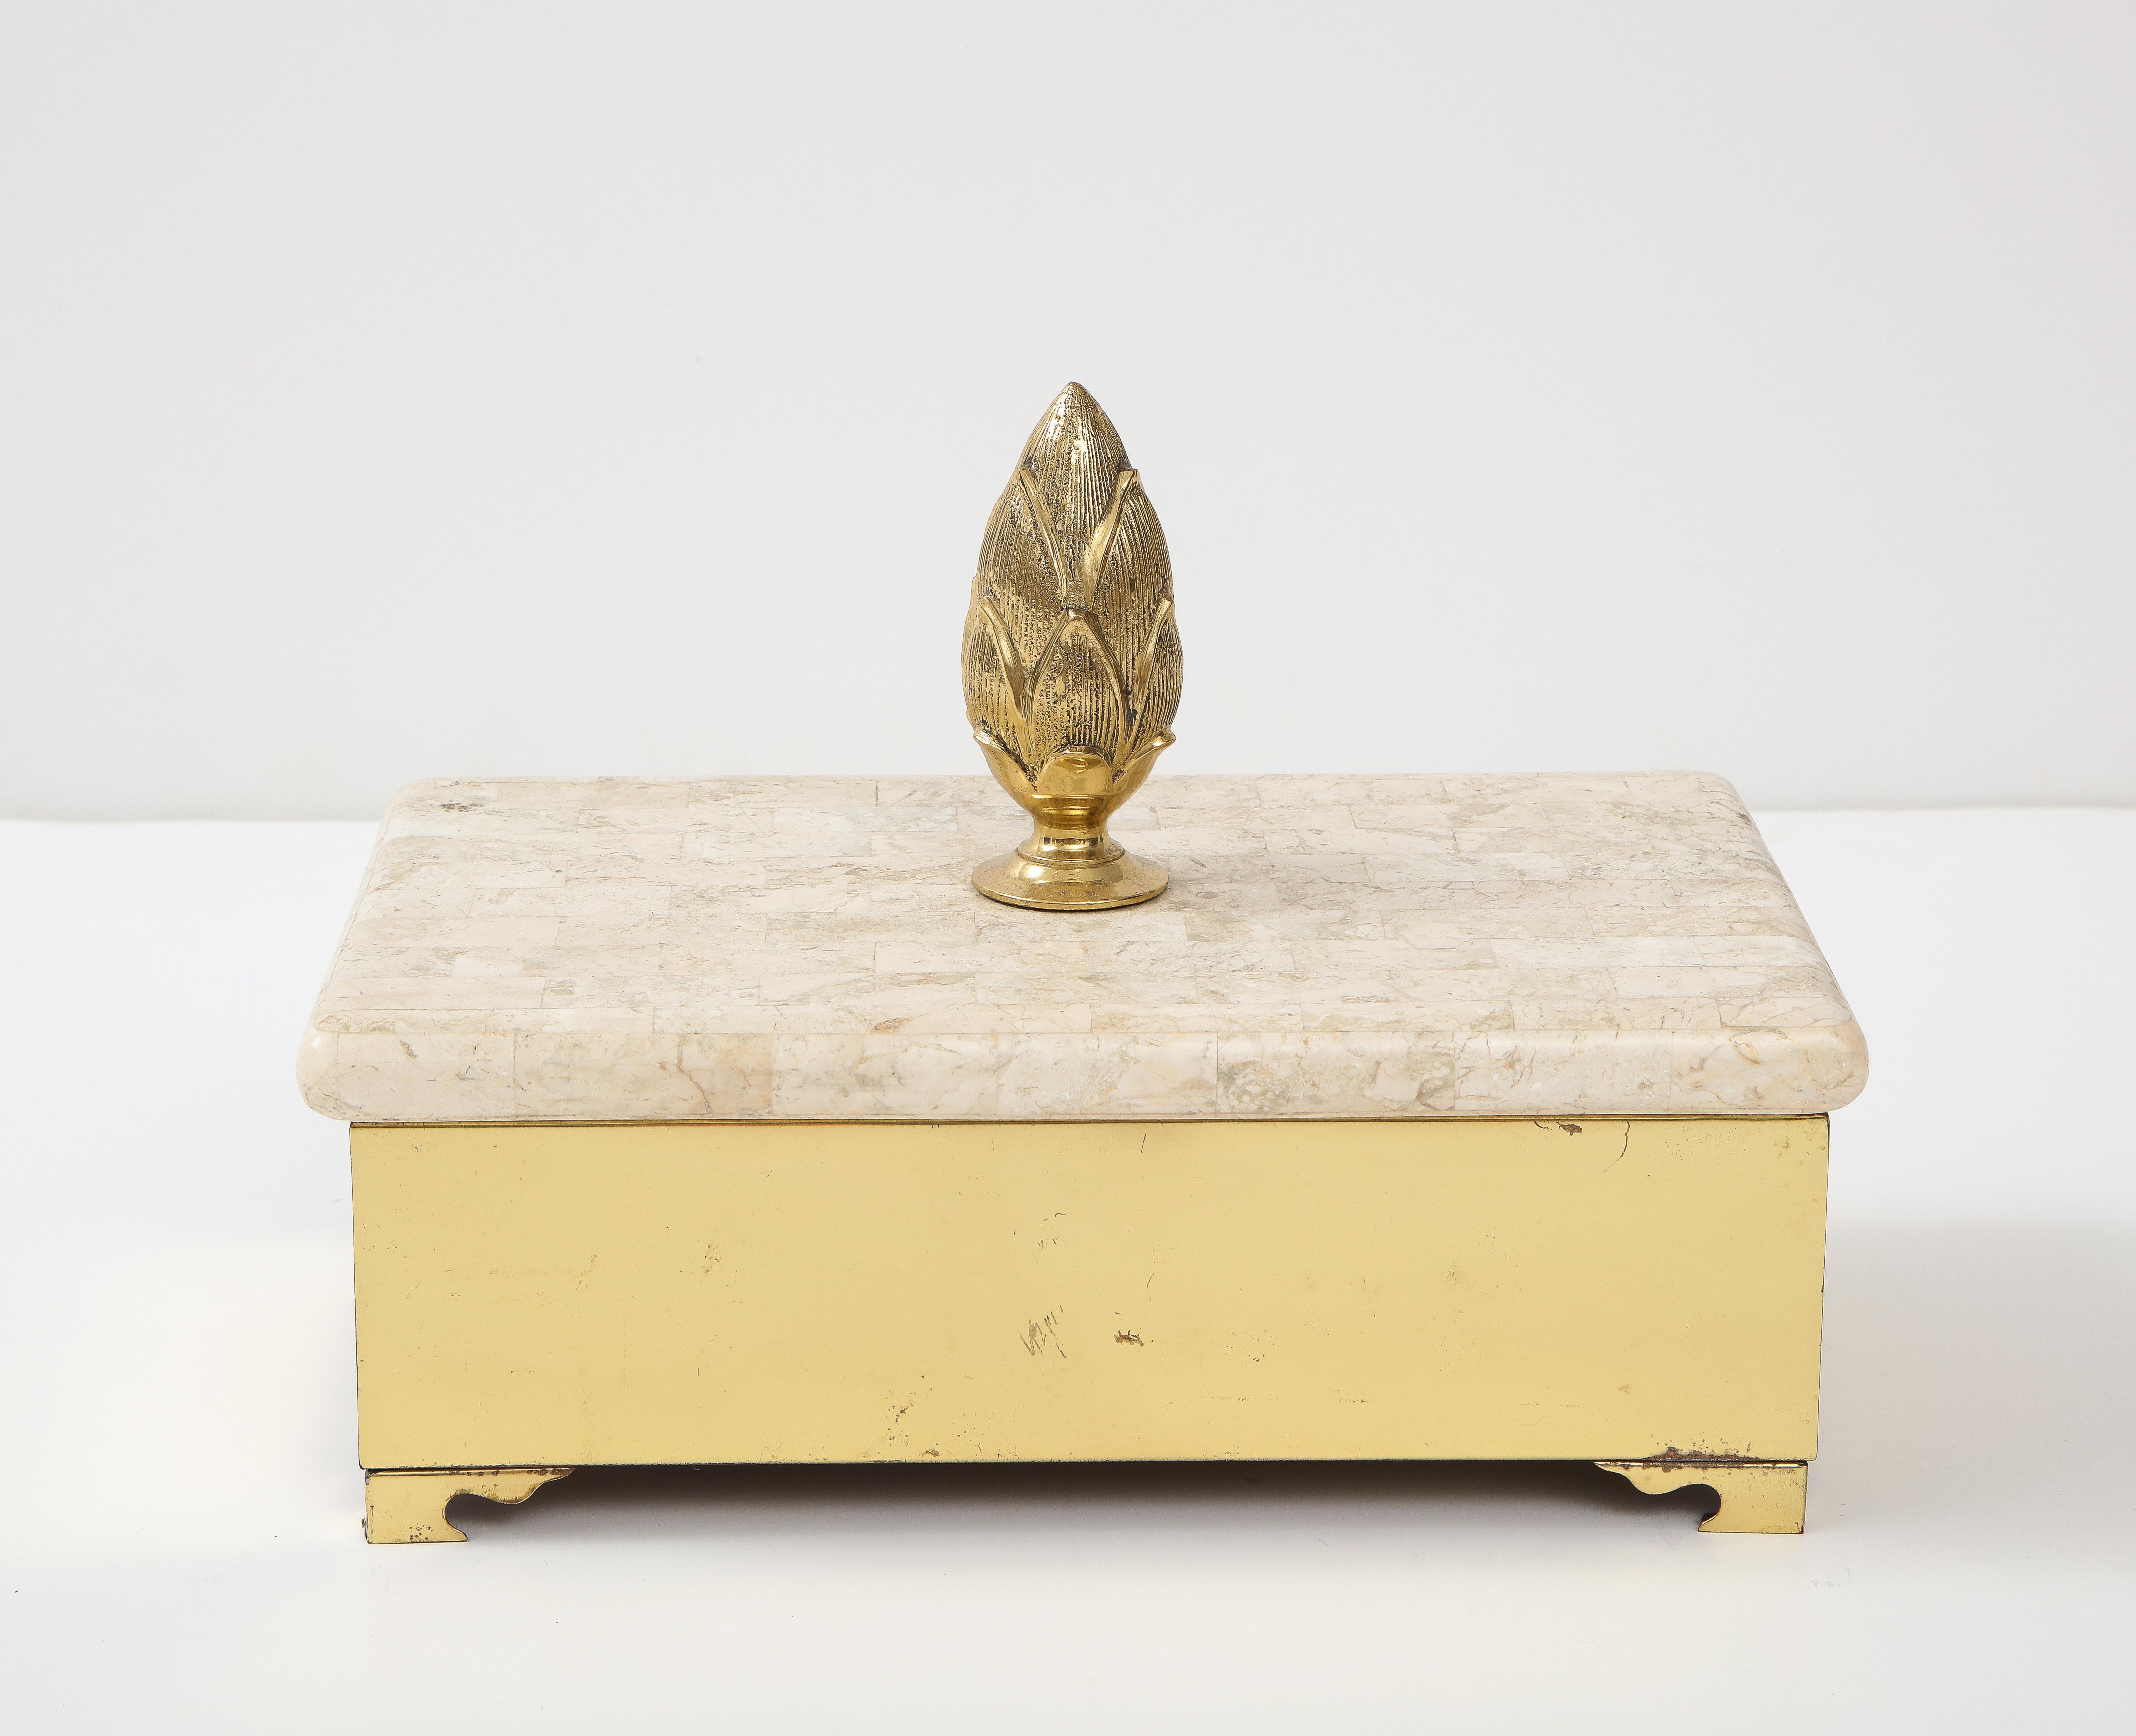 Glamorous 1980s brass letter box with a tessalated travertine lid. Lid adorned with an oversized stylized brass artichoke finial.